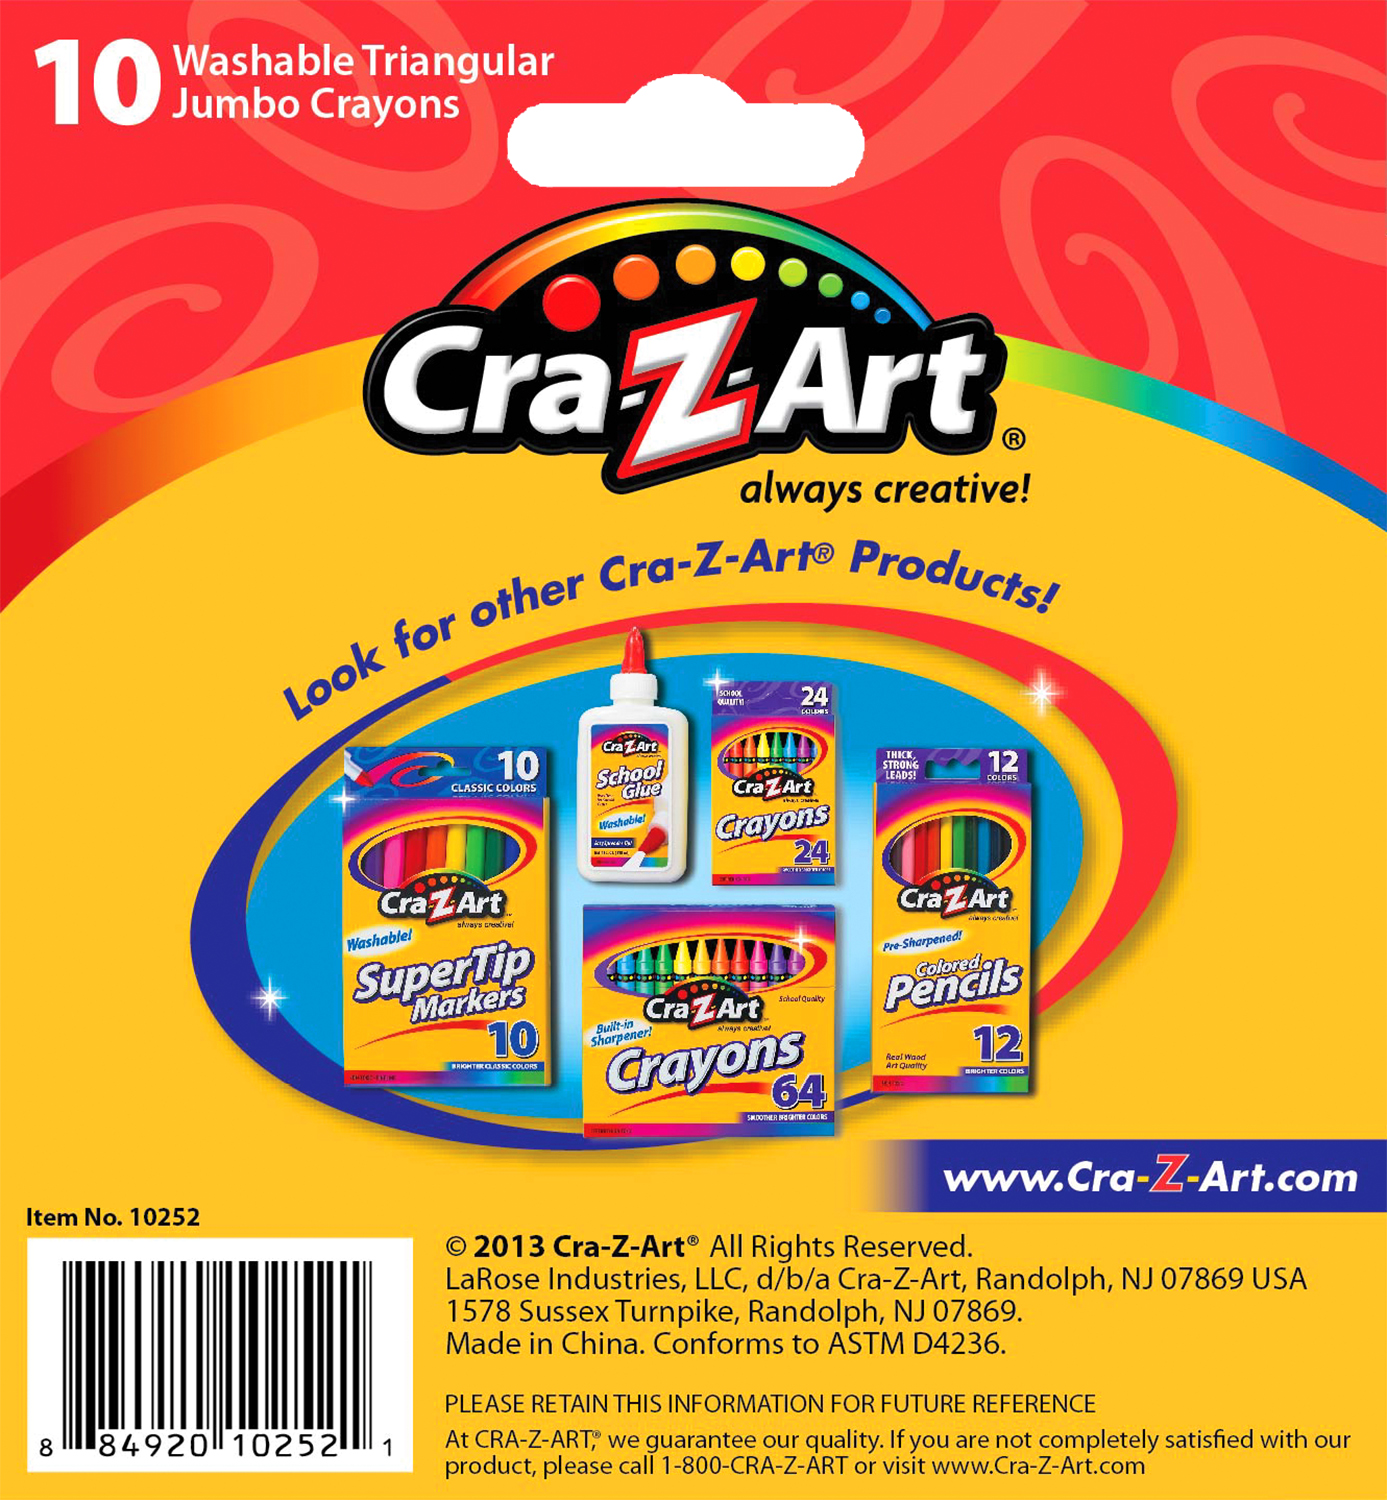 Cra-Z-Art Jumbo Washable Triangular Crayons, 10 Count, Assorted Colors, Back to School Supplies - image 3 of 9